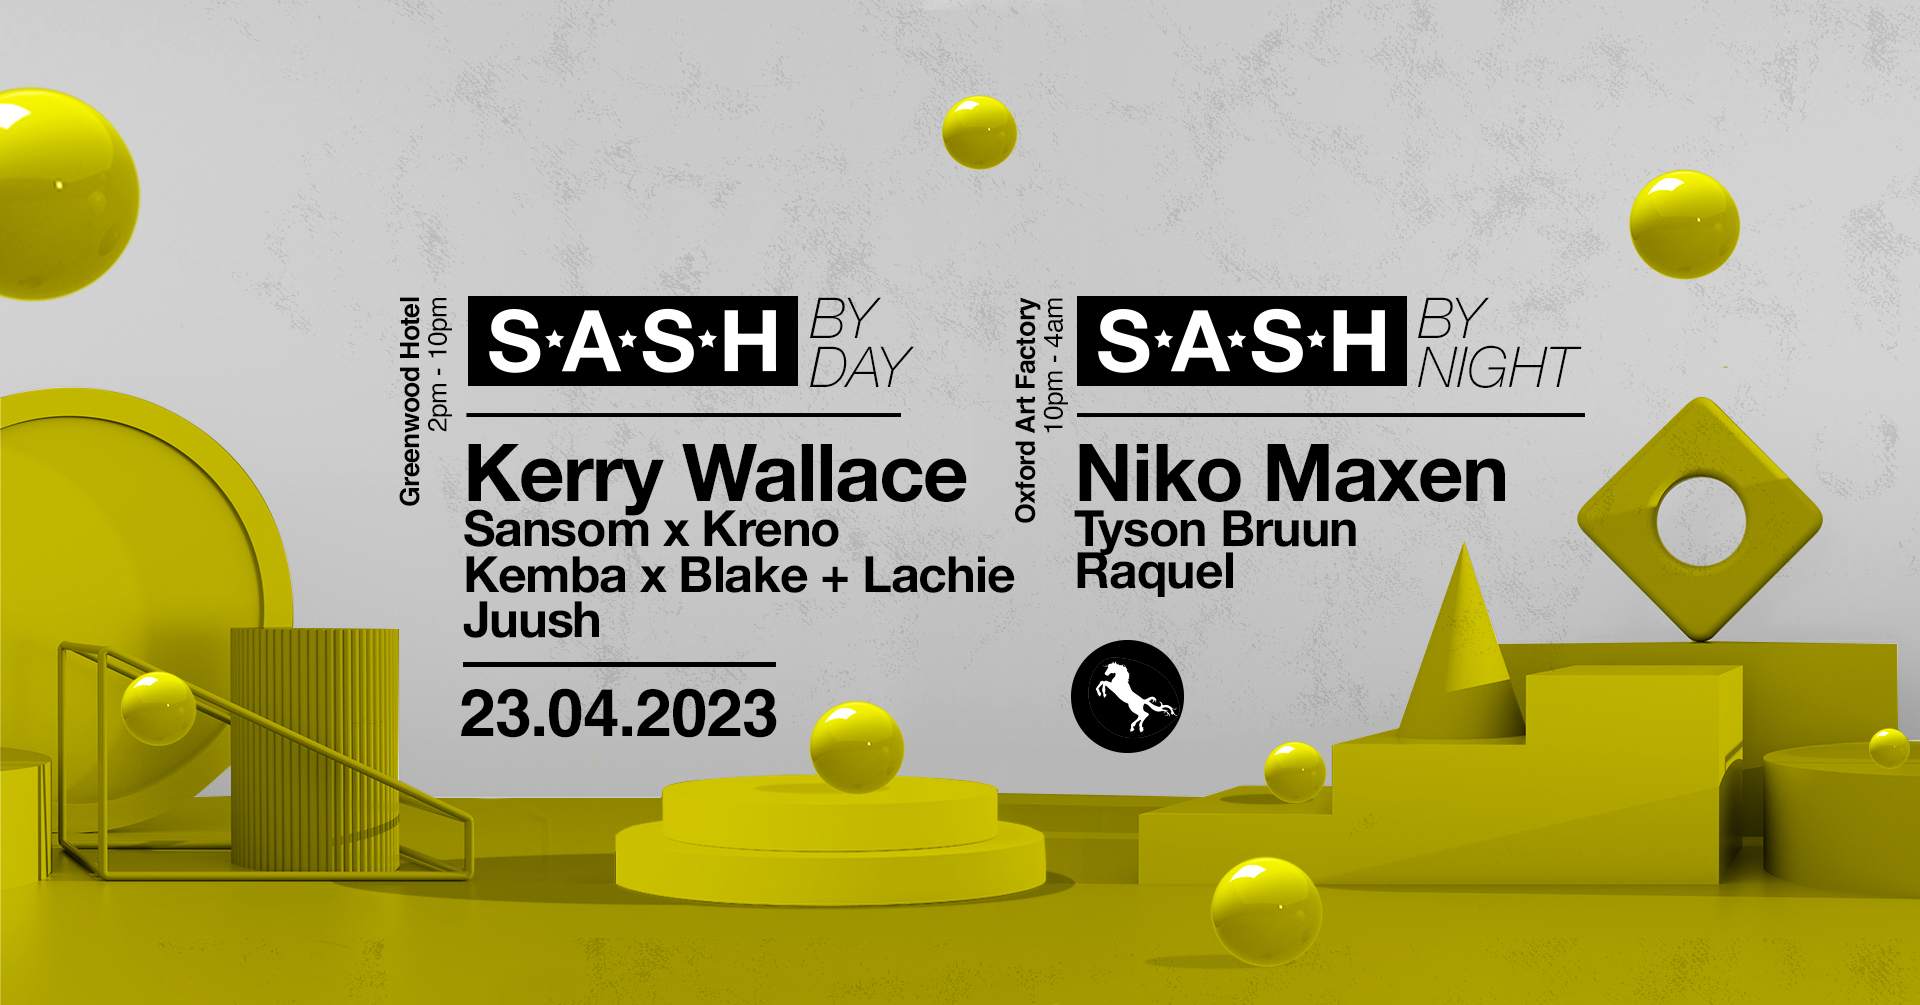 ★ S.A.S.H By Day & Night ★ Kerry Wallace ★ Niko Maxen ★ 23rd April ★ - Página frontal